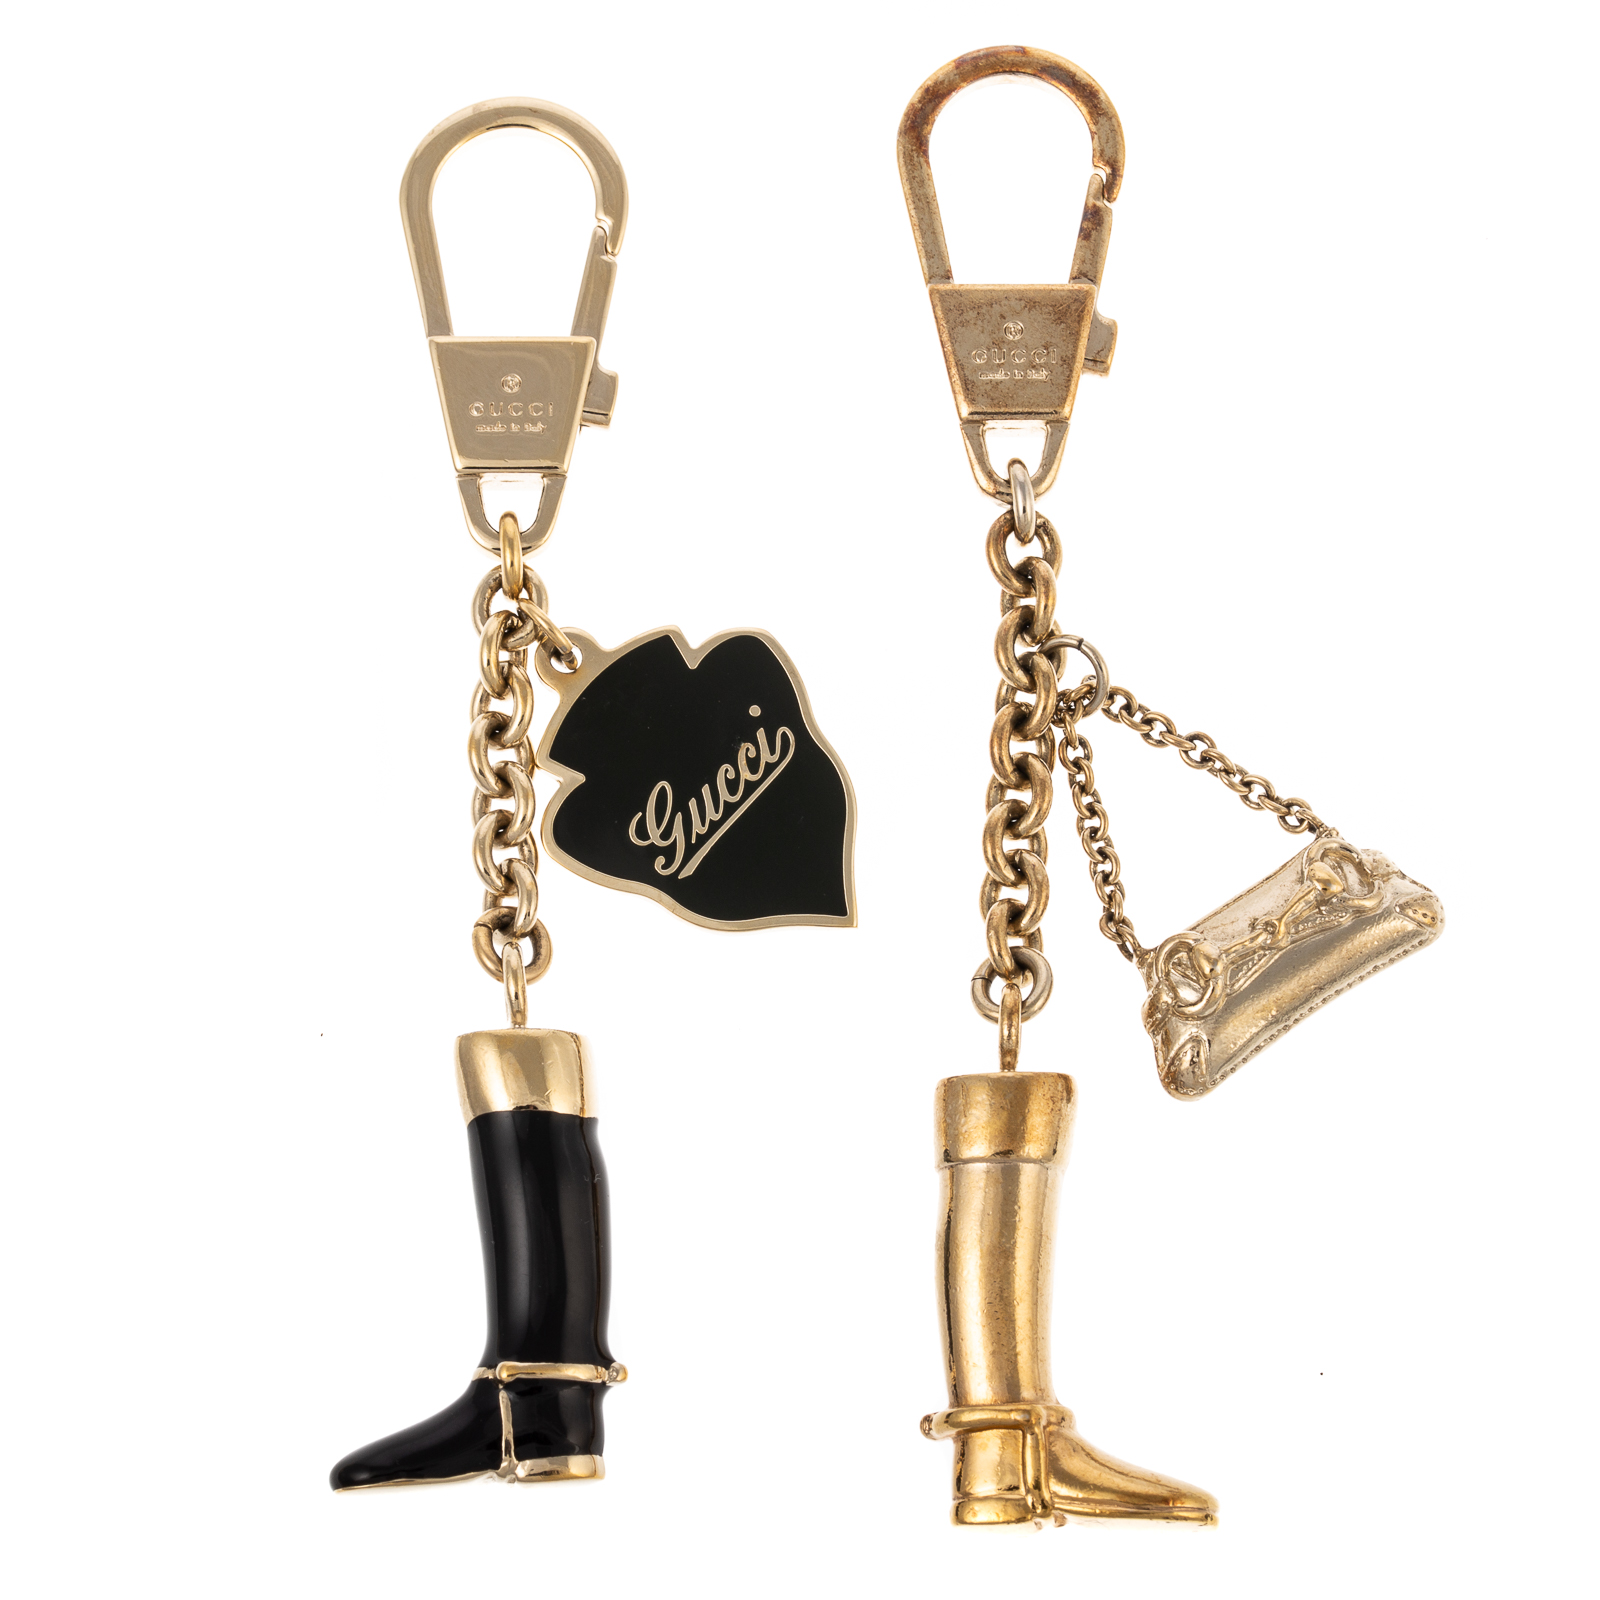 TWO GUCCI EQUESTRIAN BOOT KEYCHAINS